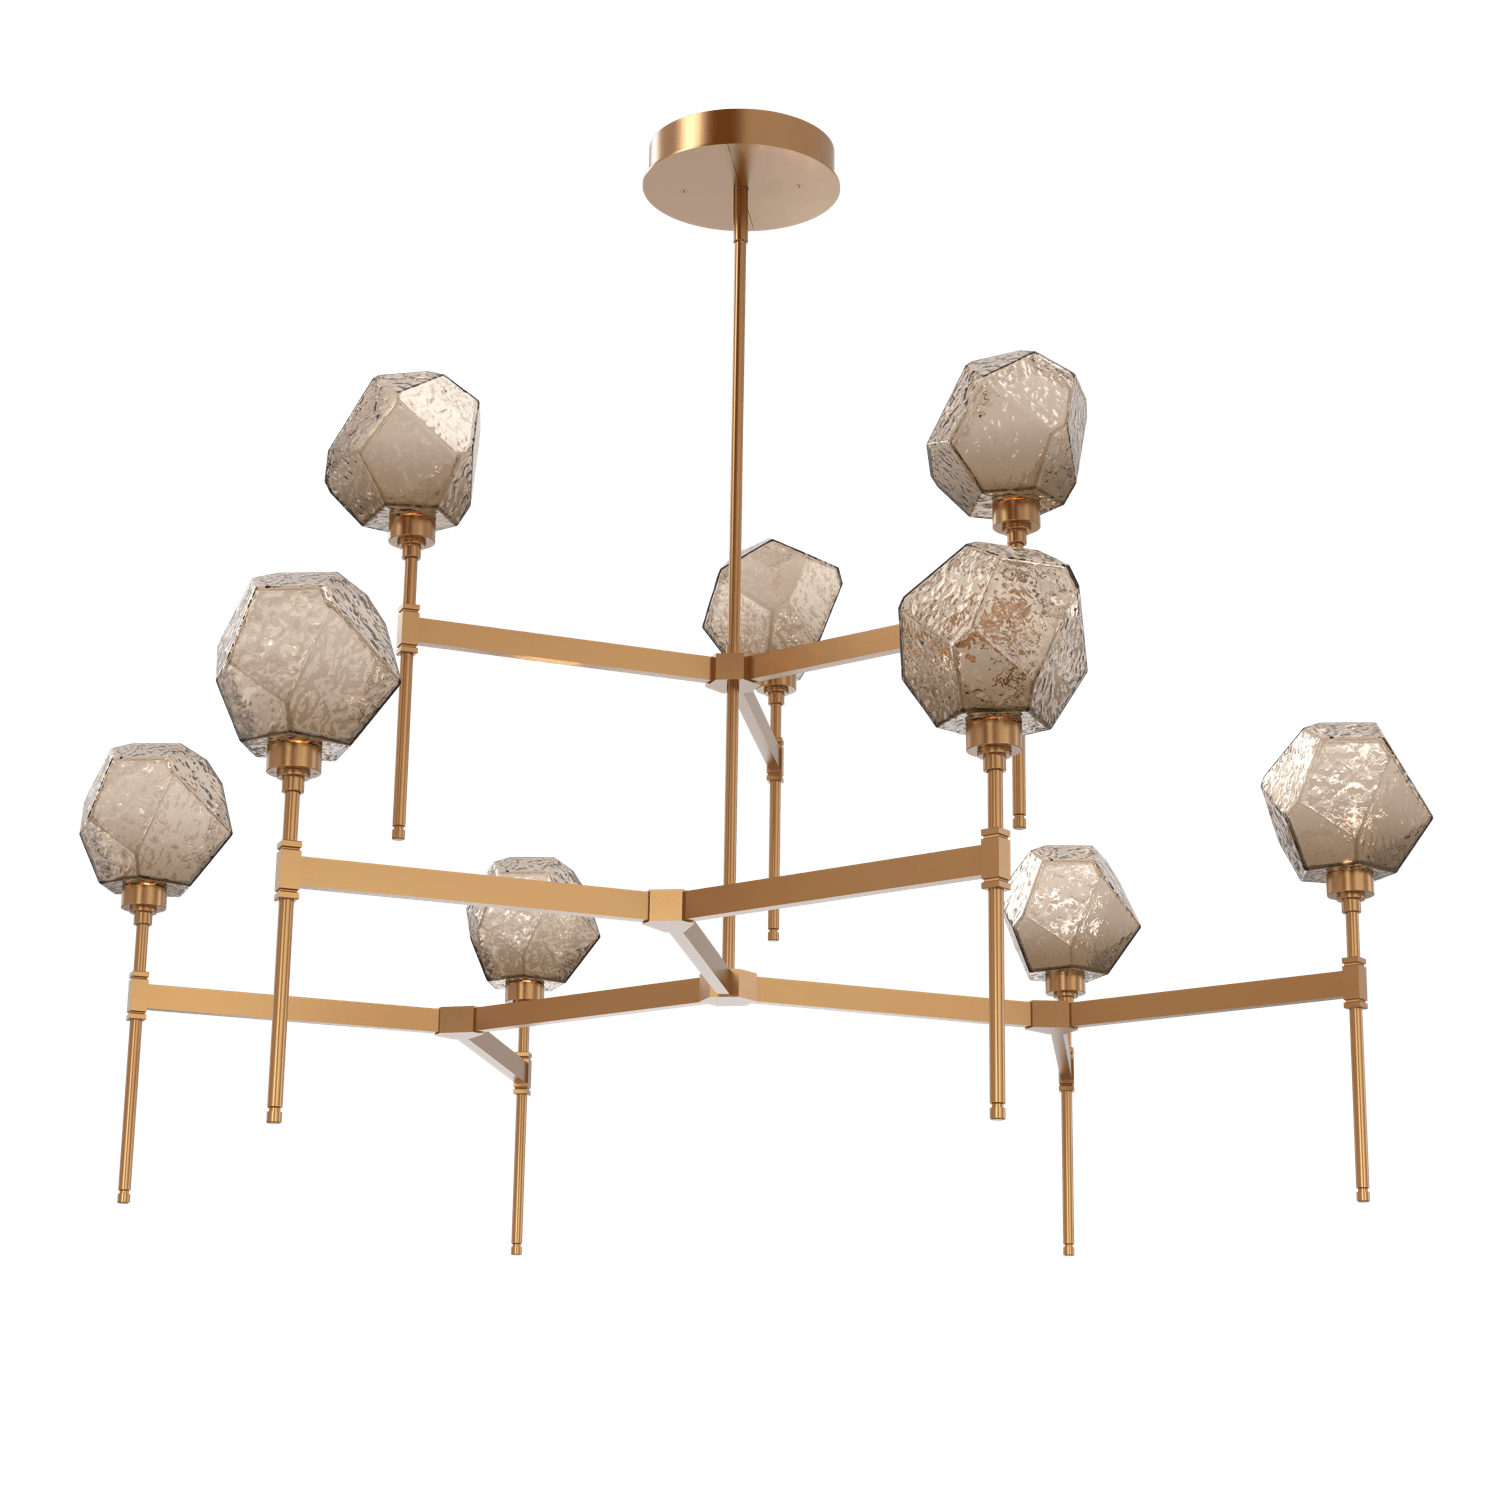 CHB0039-55-NB-B-Hammerton-Studio-Gem-round-two-tier-belvedere-chandelier-with-novel-brass-finish-and-bronze-blown-glass-shades-and-LED-lamping